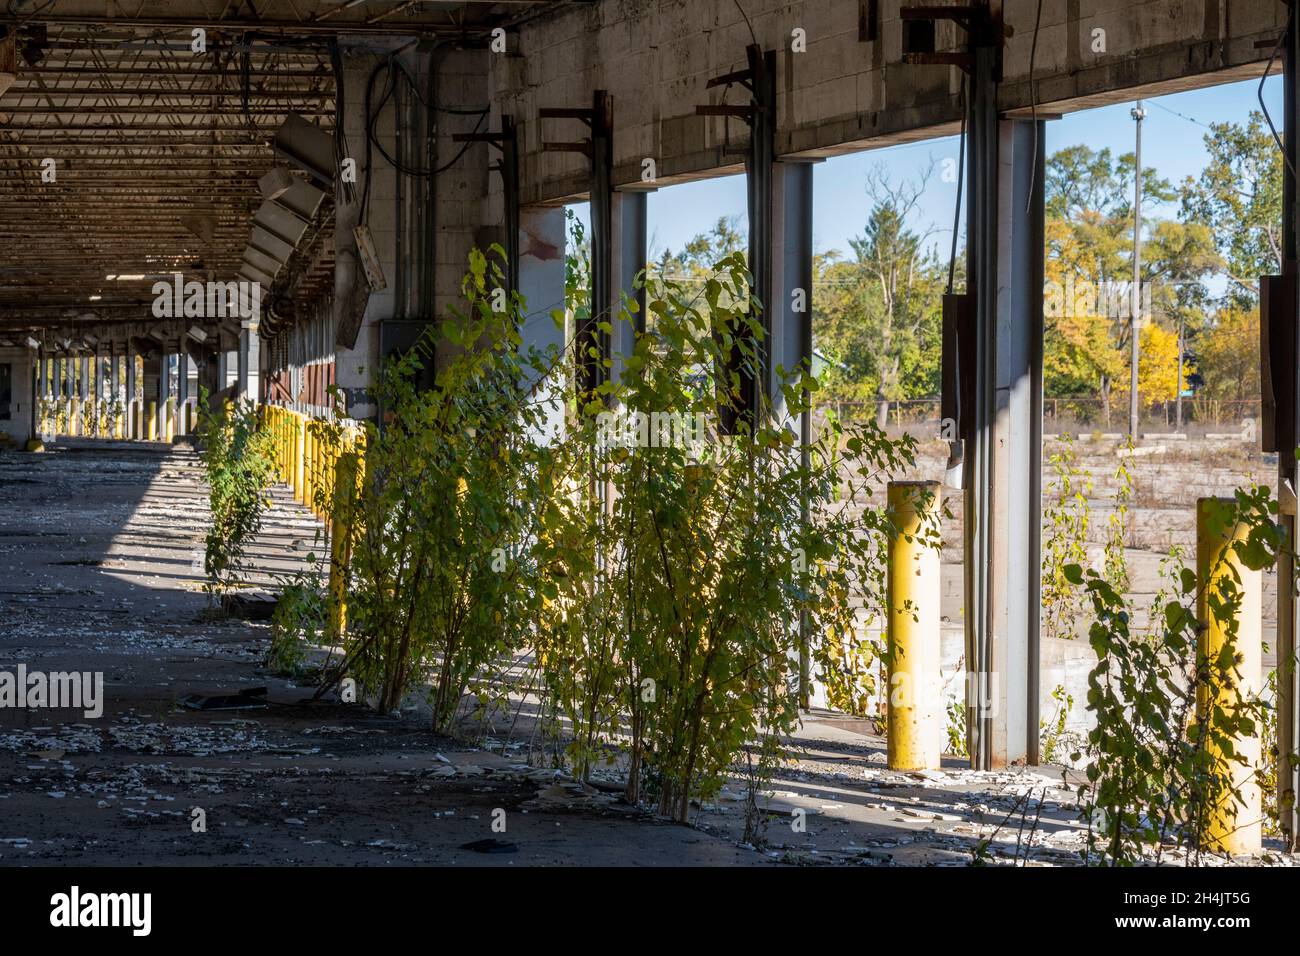 Detroit, Michigan - Weeds growing in loading docks at an abandoned trucking terminal, previously operated by Universal Truckload Services. Stock Photo